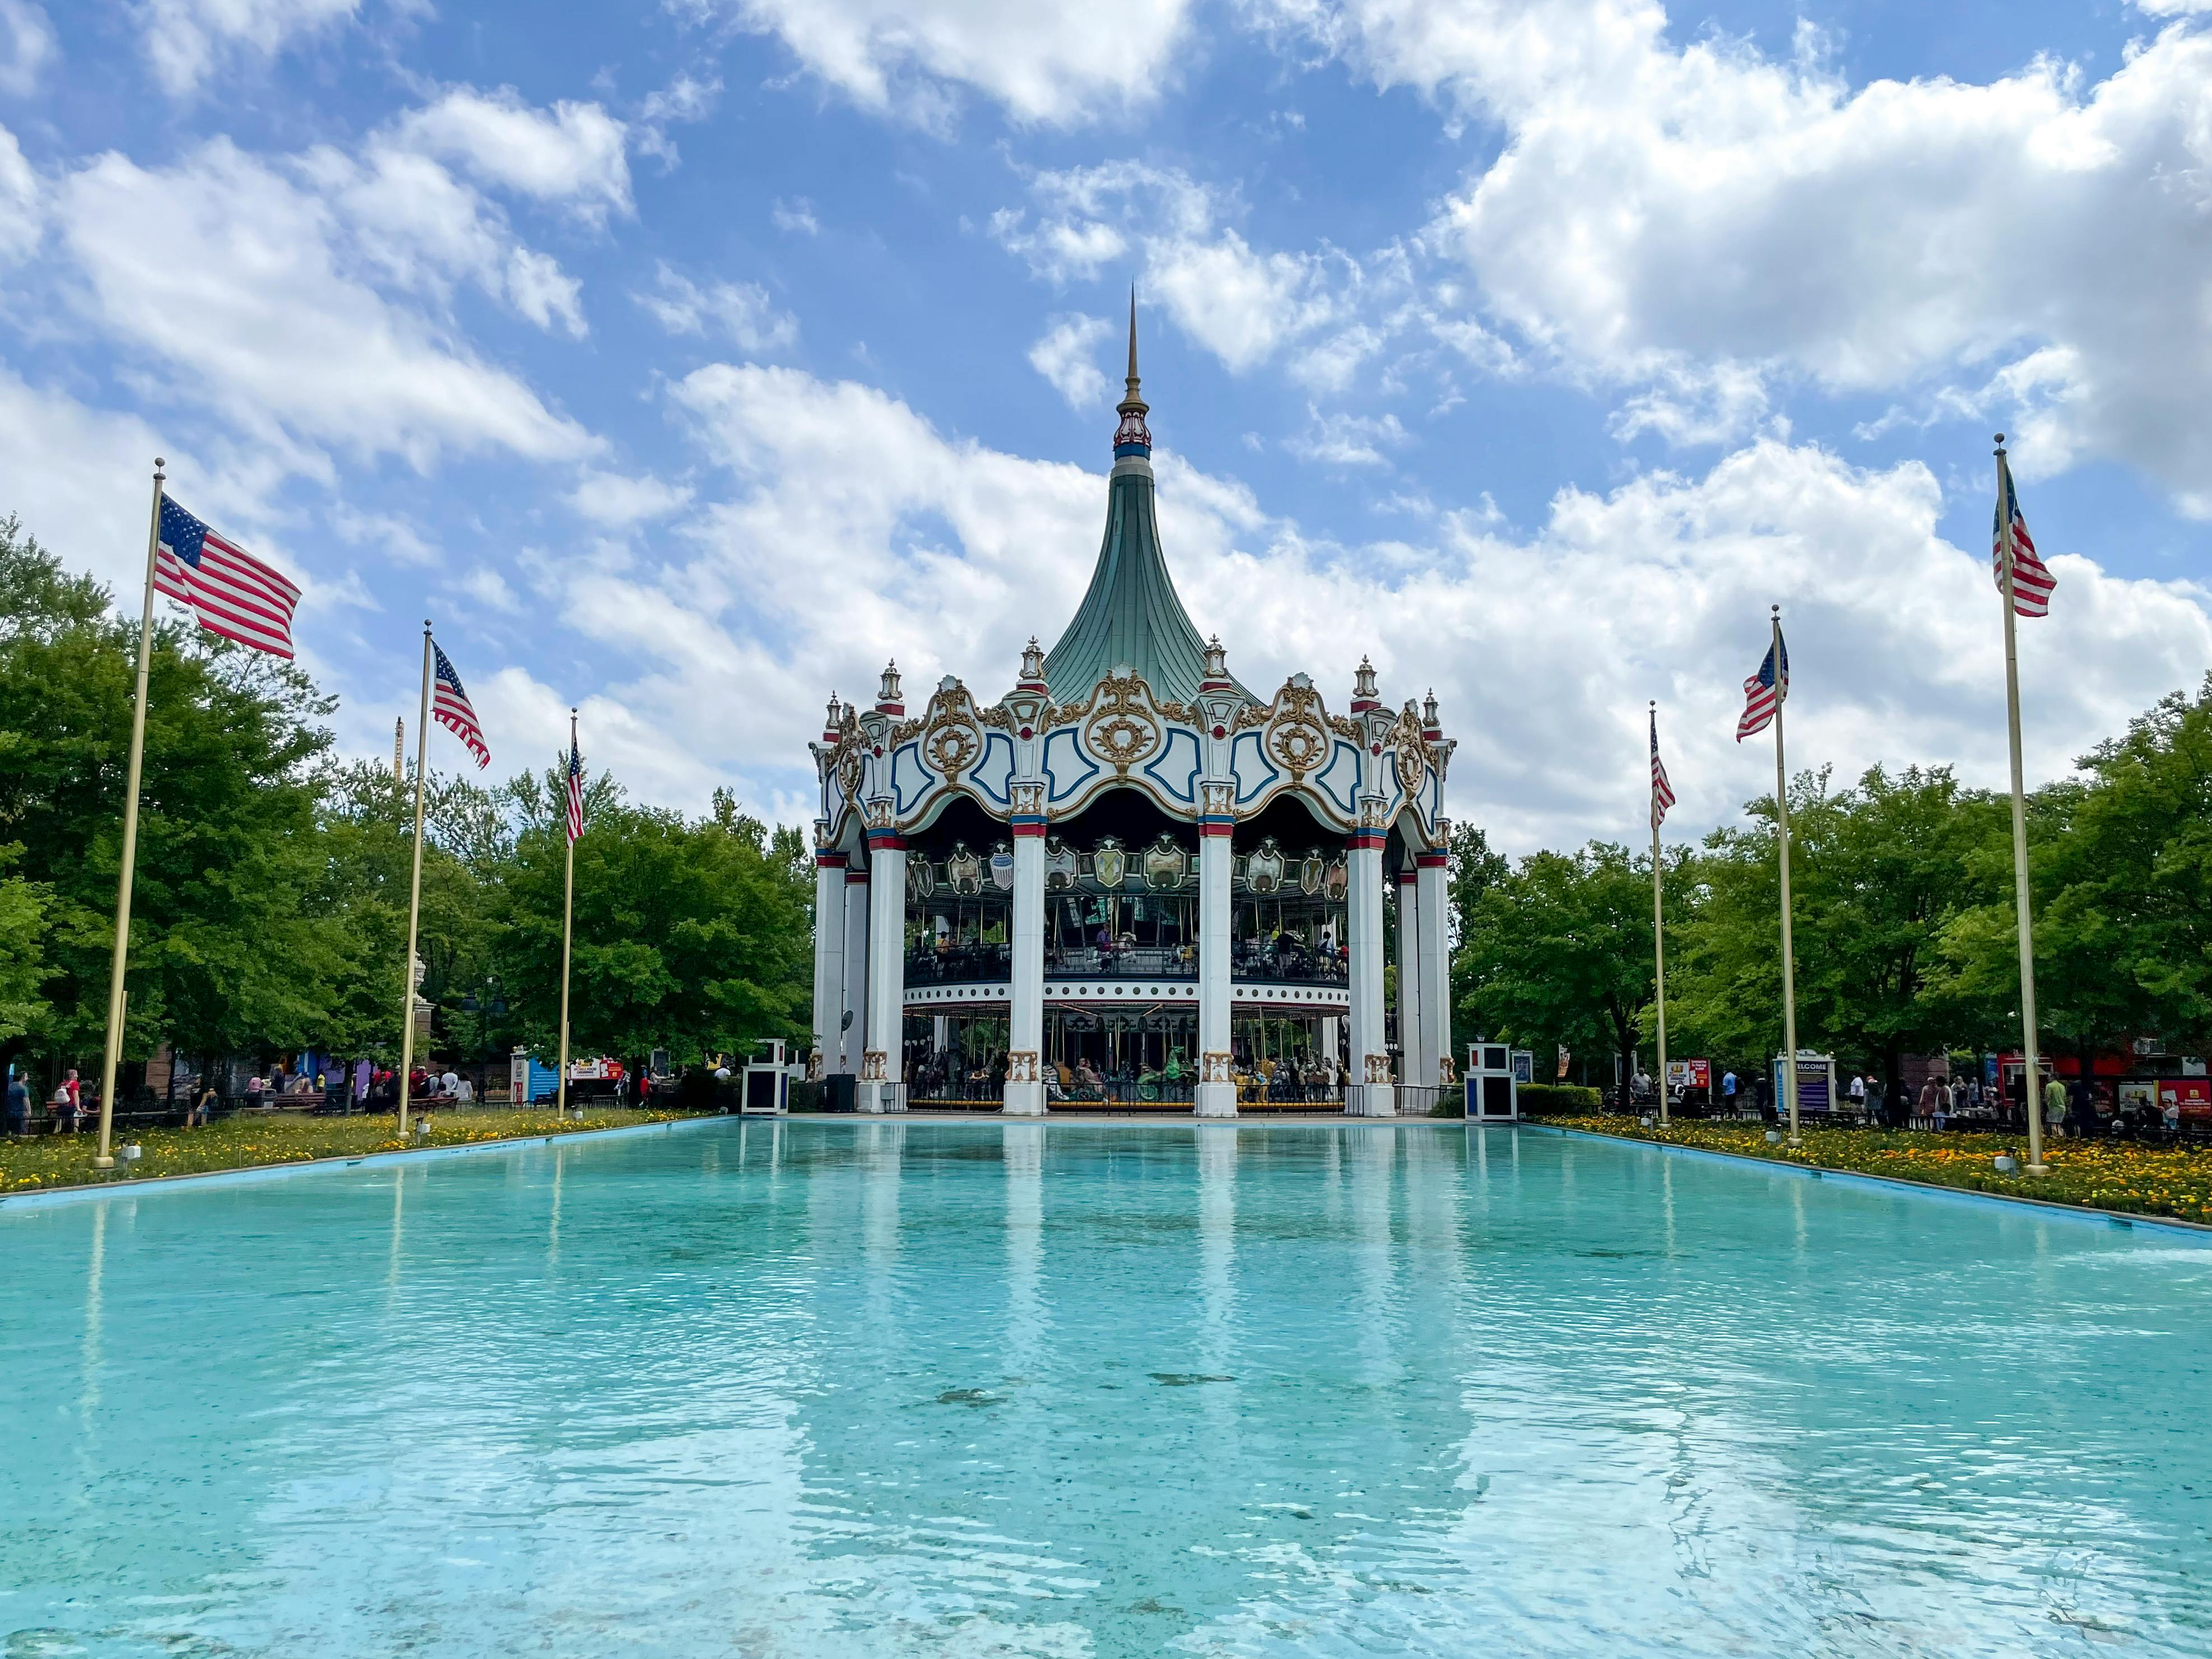 A reflective pool in front of a carousel ride